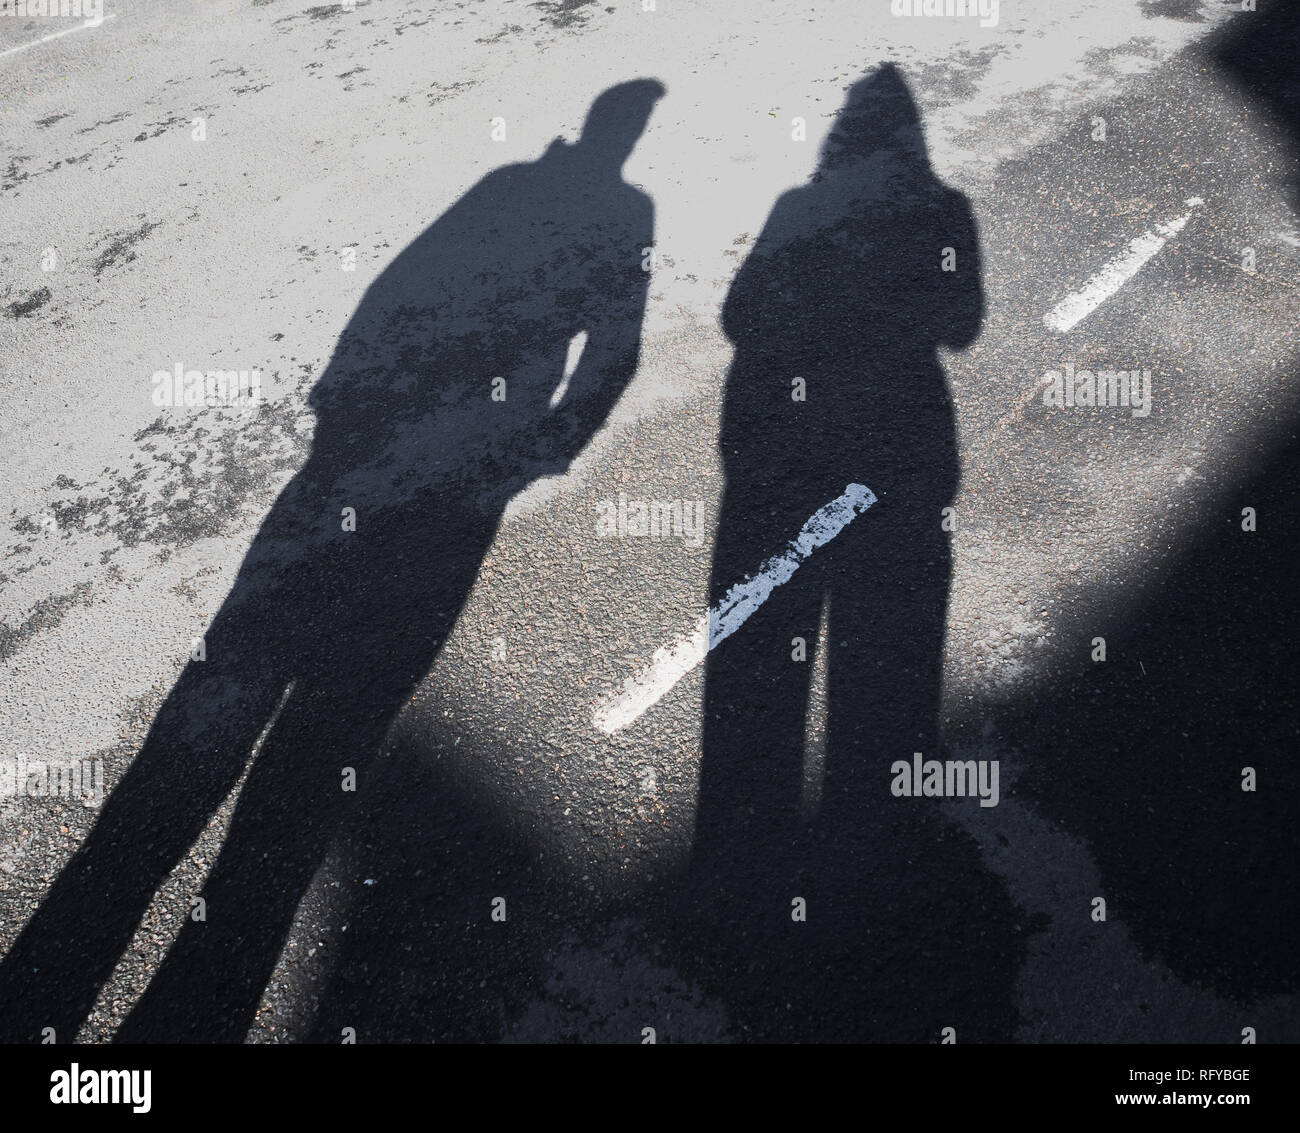 Long shadow of man and woman on asphalt road with dividing line outdoors. Stock Photo